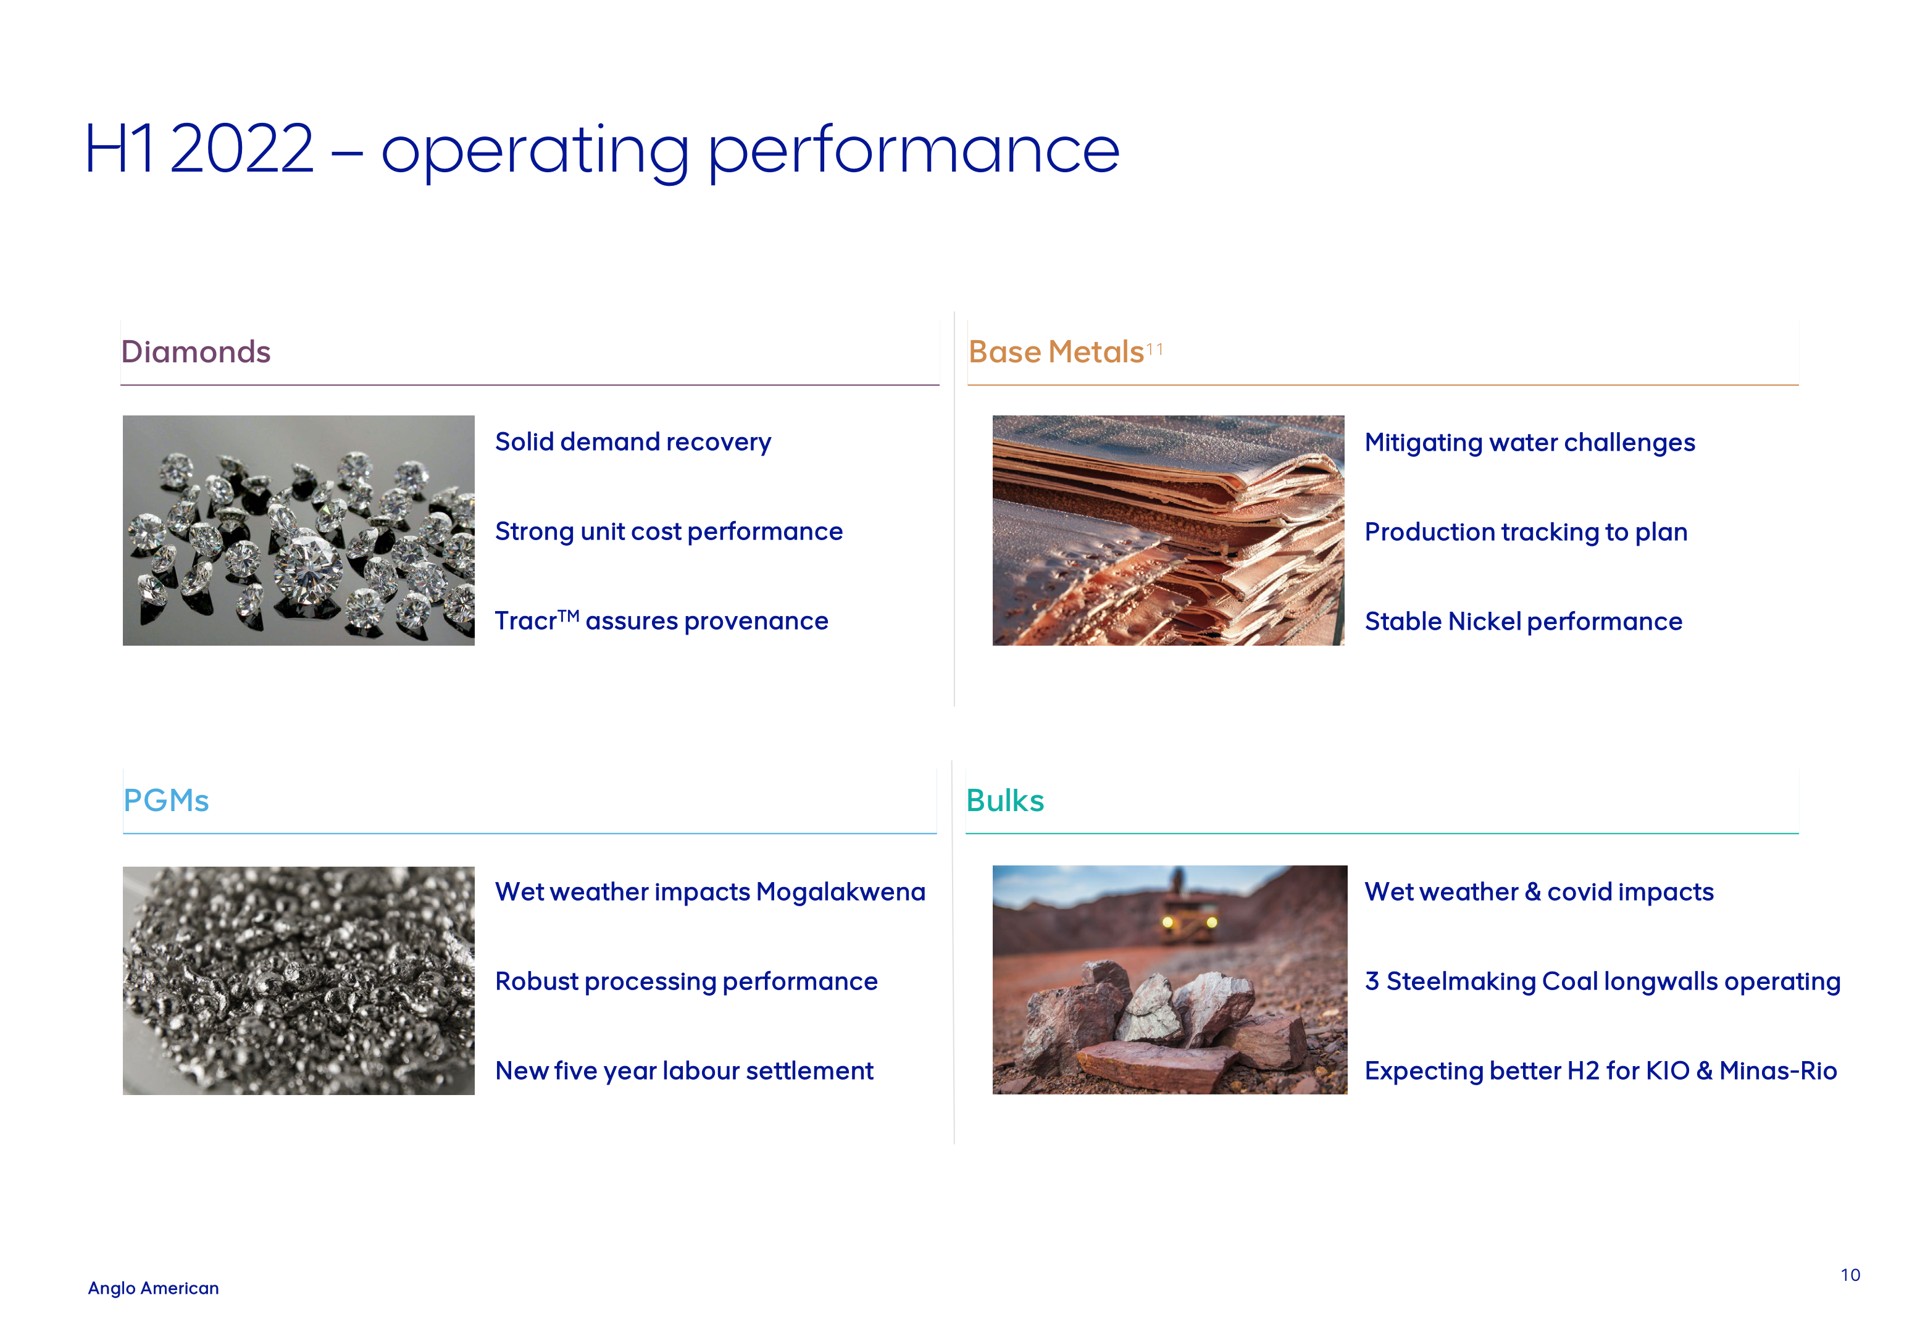 operating performance diamonds base metals solid demand recovery mitigating water challenges strong unit cost production tracking to plan assures provenance stable nickel expecting better for minas rio steelmaking coal wet weather impacts new five year labour settlement robust processing wet weather covid impacts | AngloAmerican